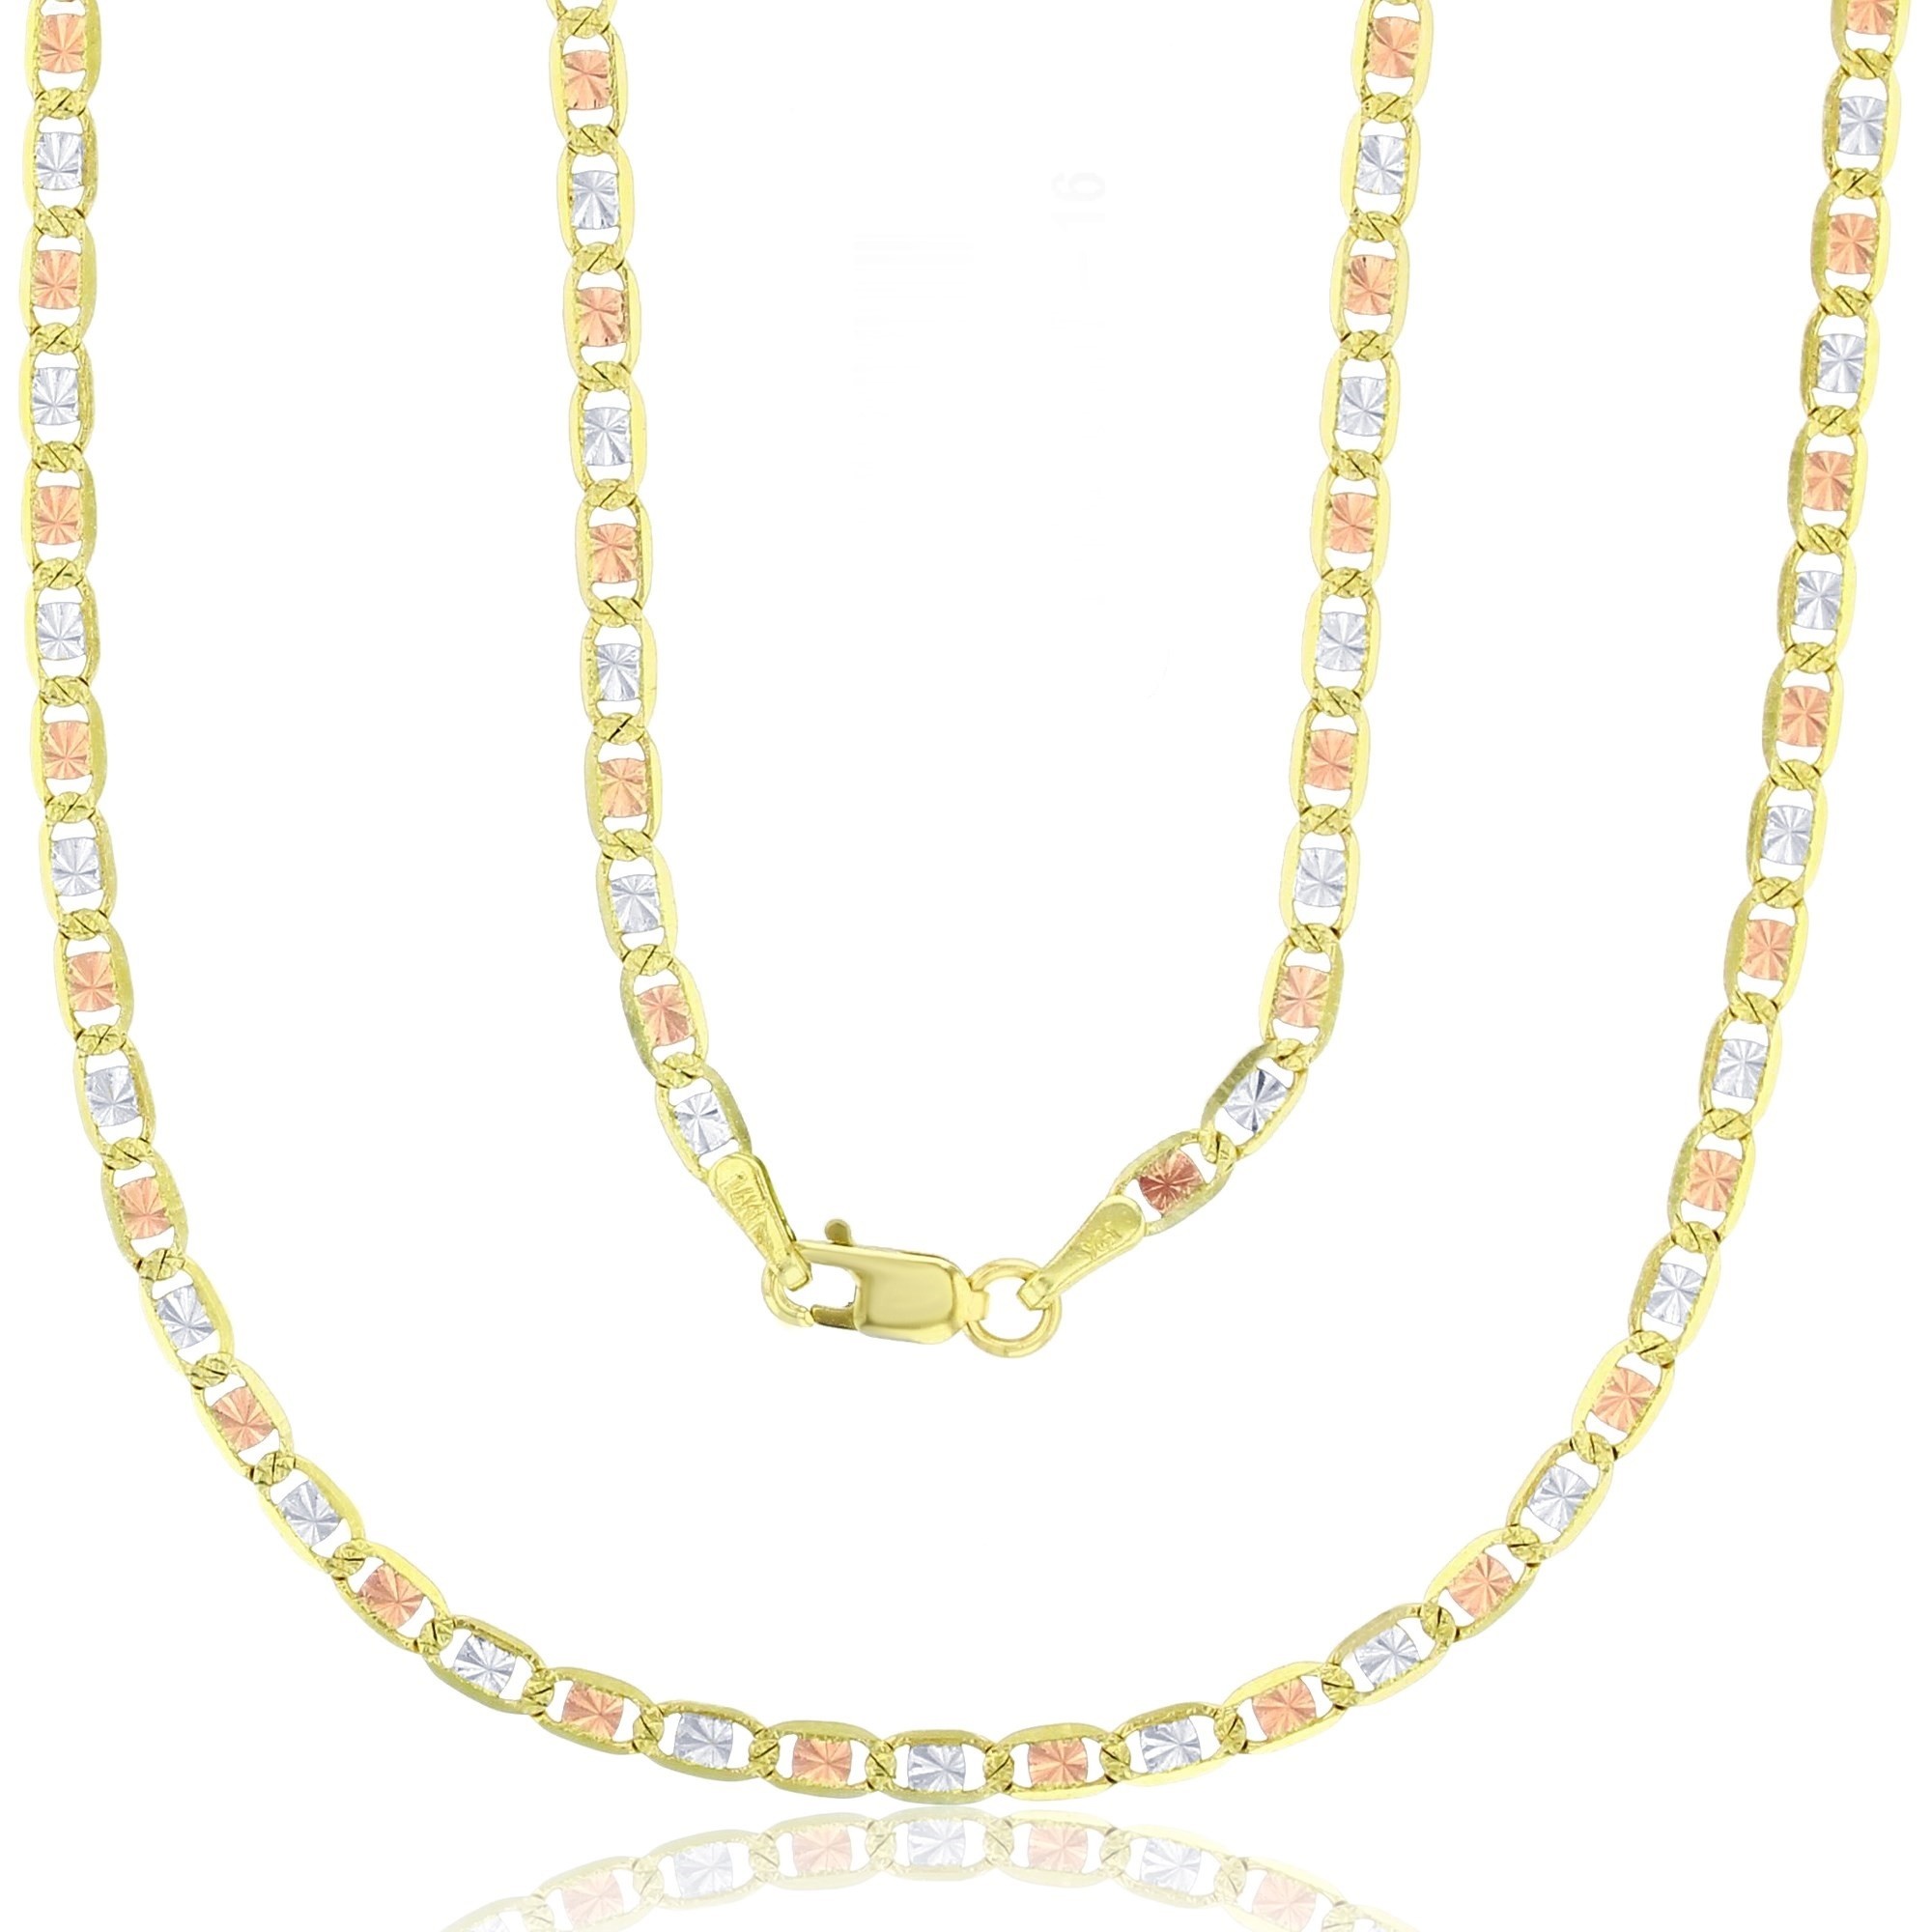 14KT Gold 18" Tricolor Valentino Star DC Chain 060 Gauge 2.75MM